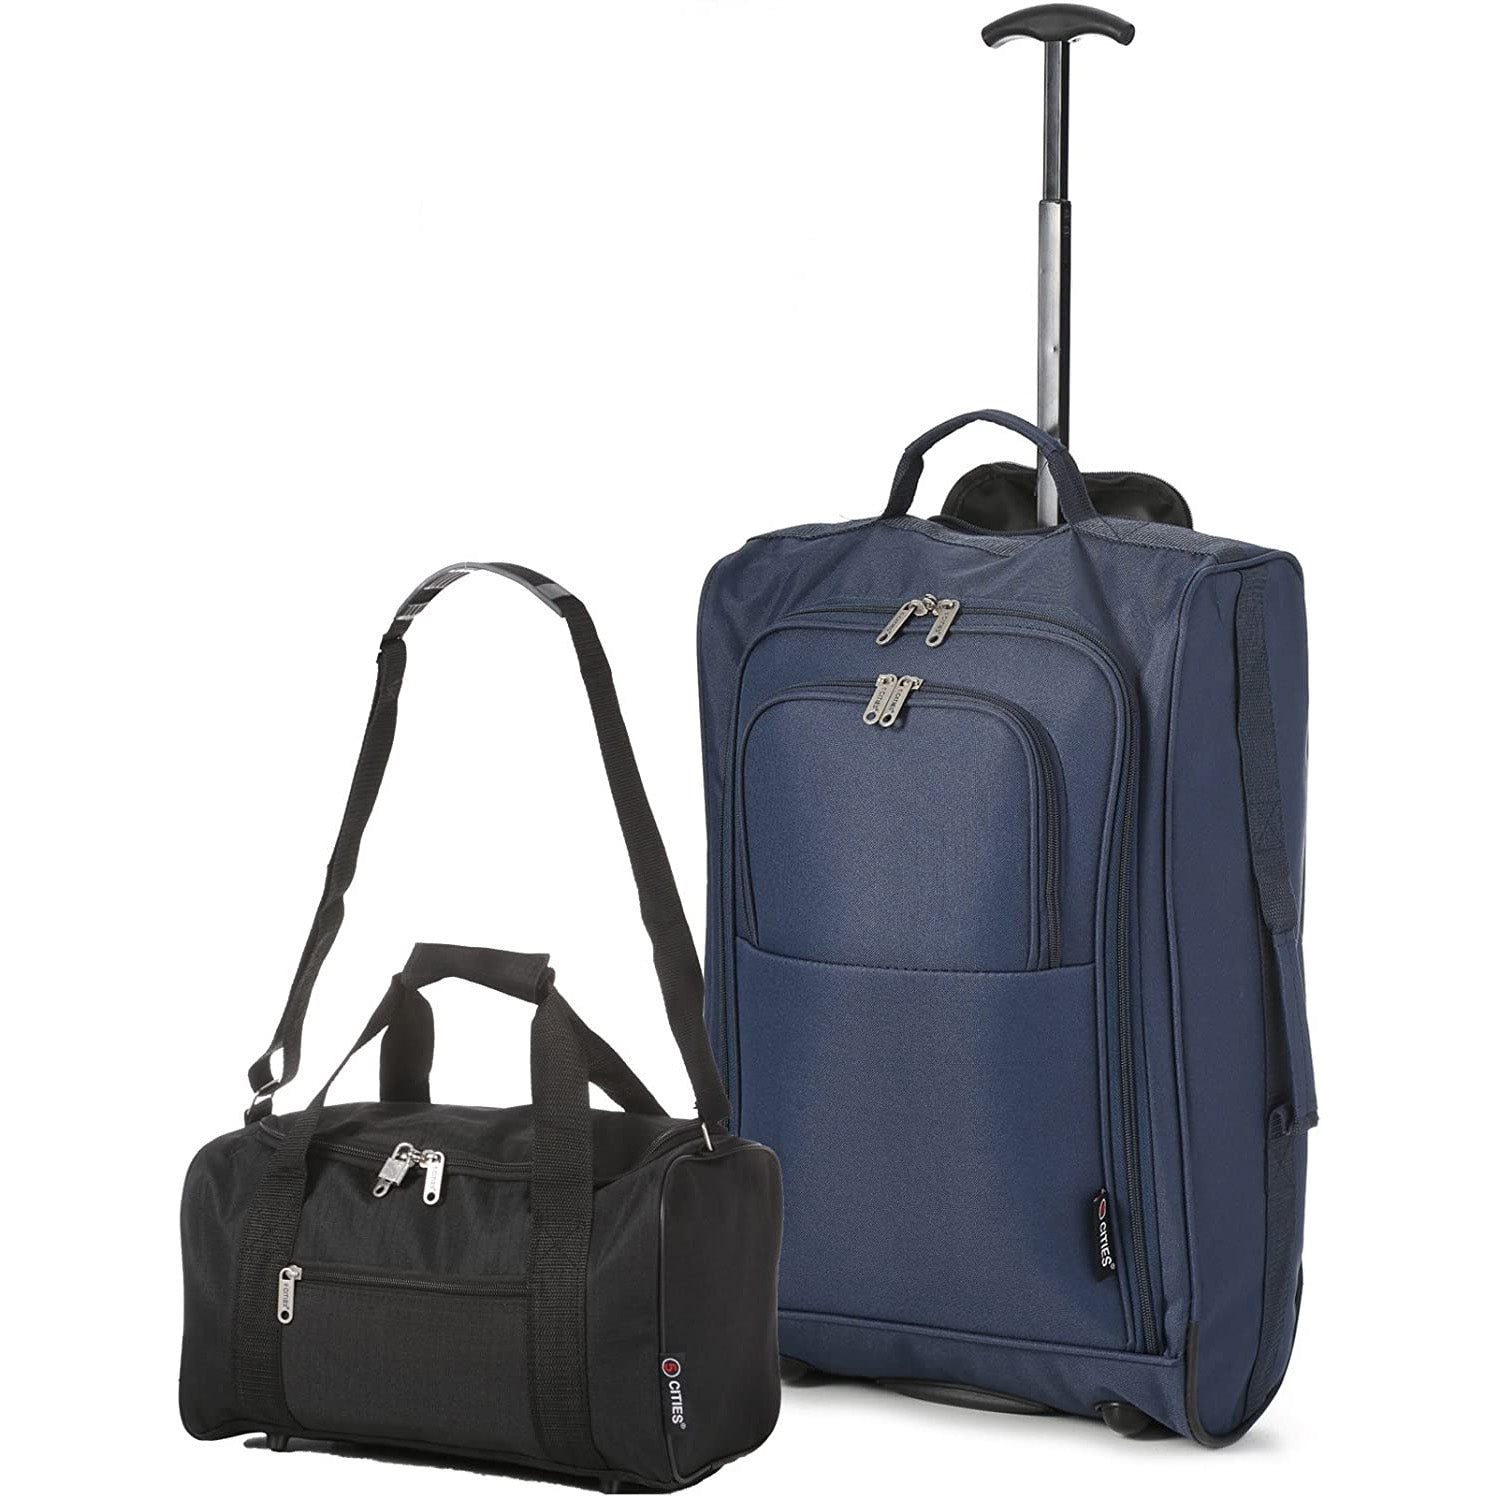 5 Cities (55x35x20cm) Lightweight Cabin Hand Luggage and (35x20x20cm) Holdall Flight Bag